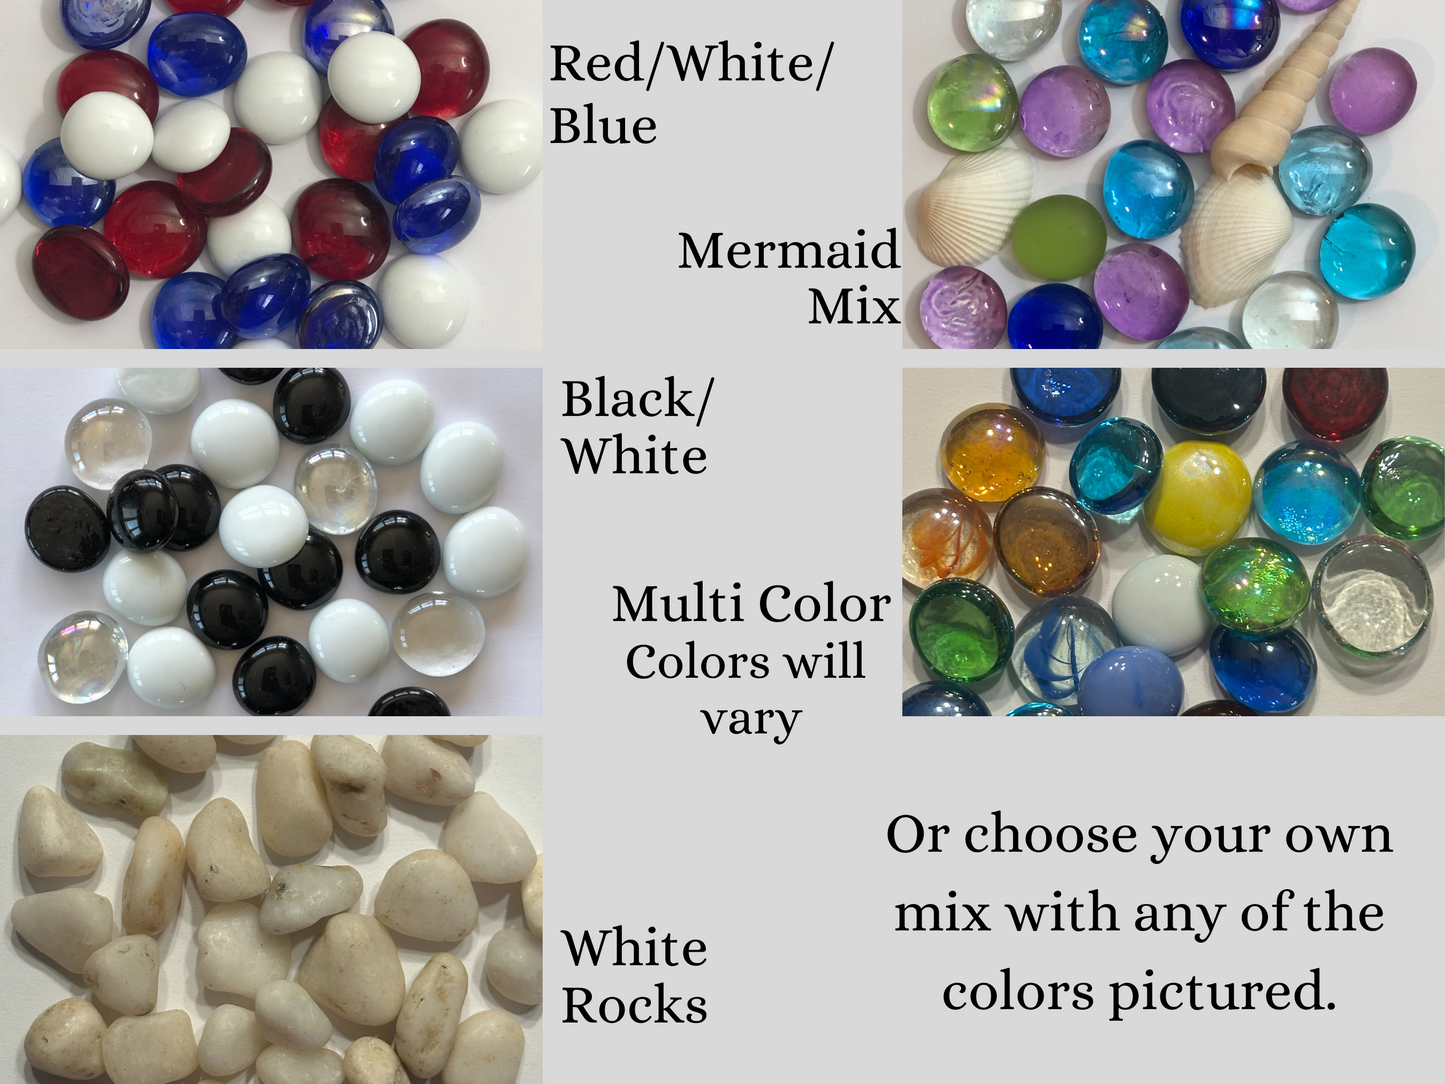 Different mosaic gem options shown to choose from.  Gems are used to place in cement when making stepping stone. Several different options to choose from including one of our top sellers - Purple/Aqua 